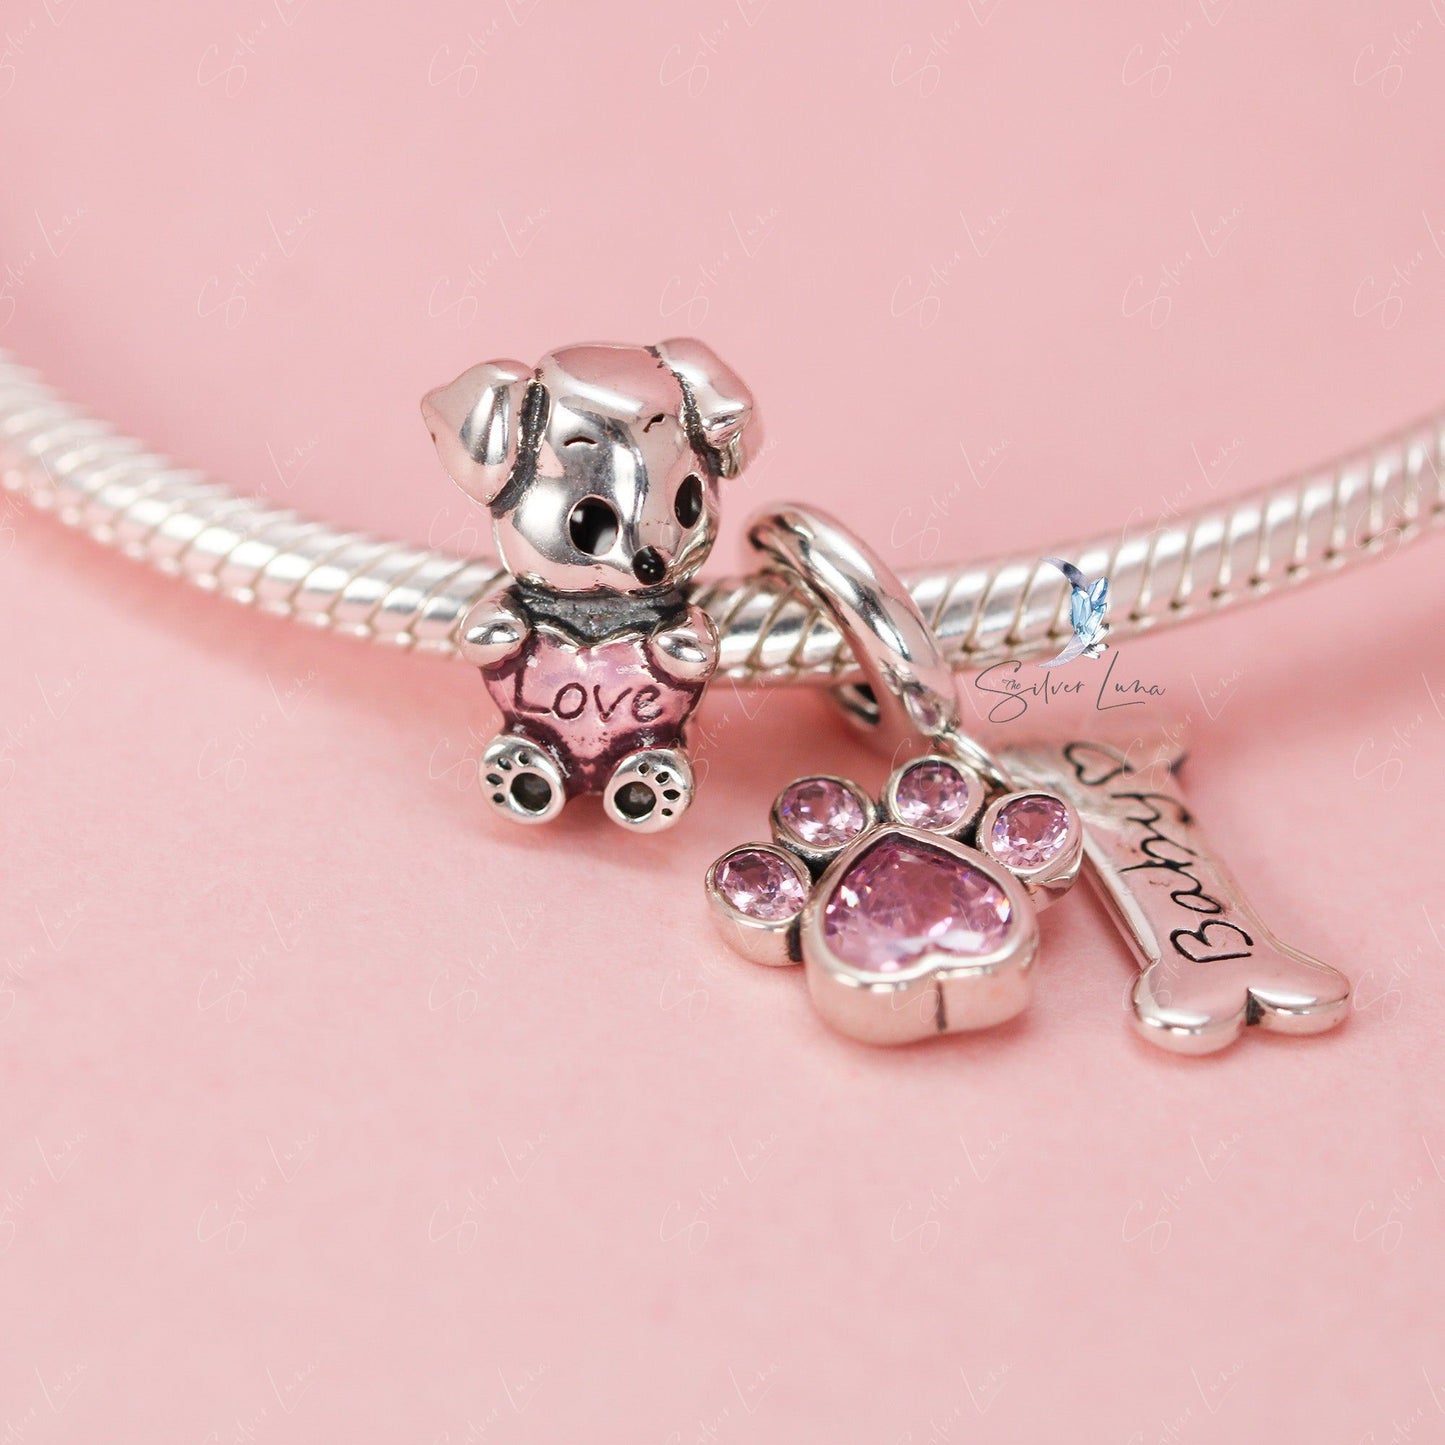 Dog holding heart sterling silver bead charm